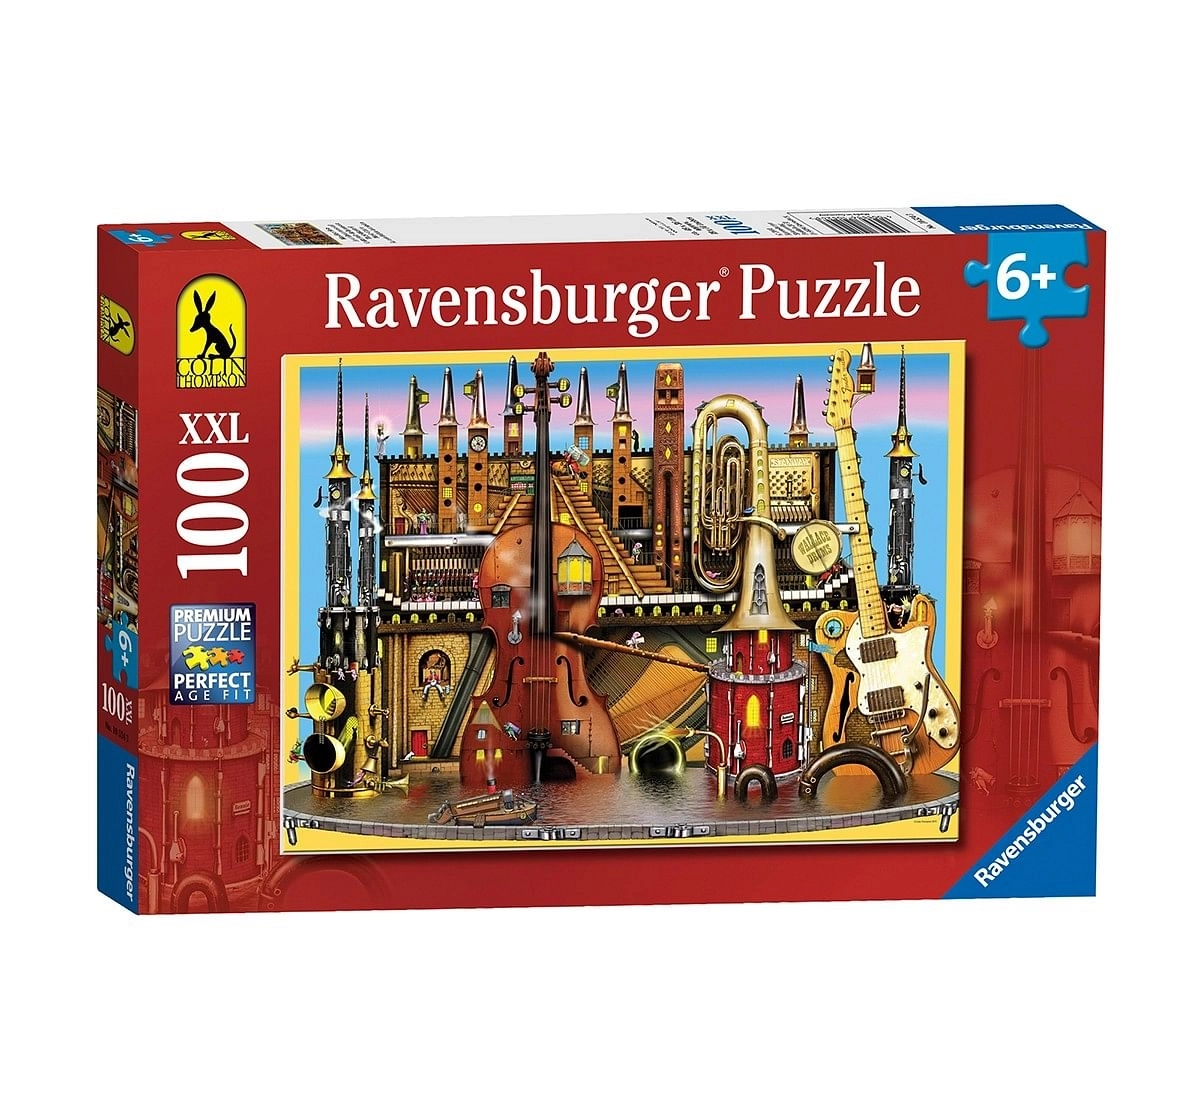 Hamleys Ravensburger 100 Pc Puzzle Puzzles for Kids age 6Y+ 